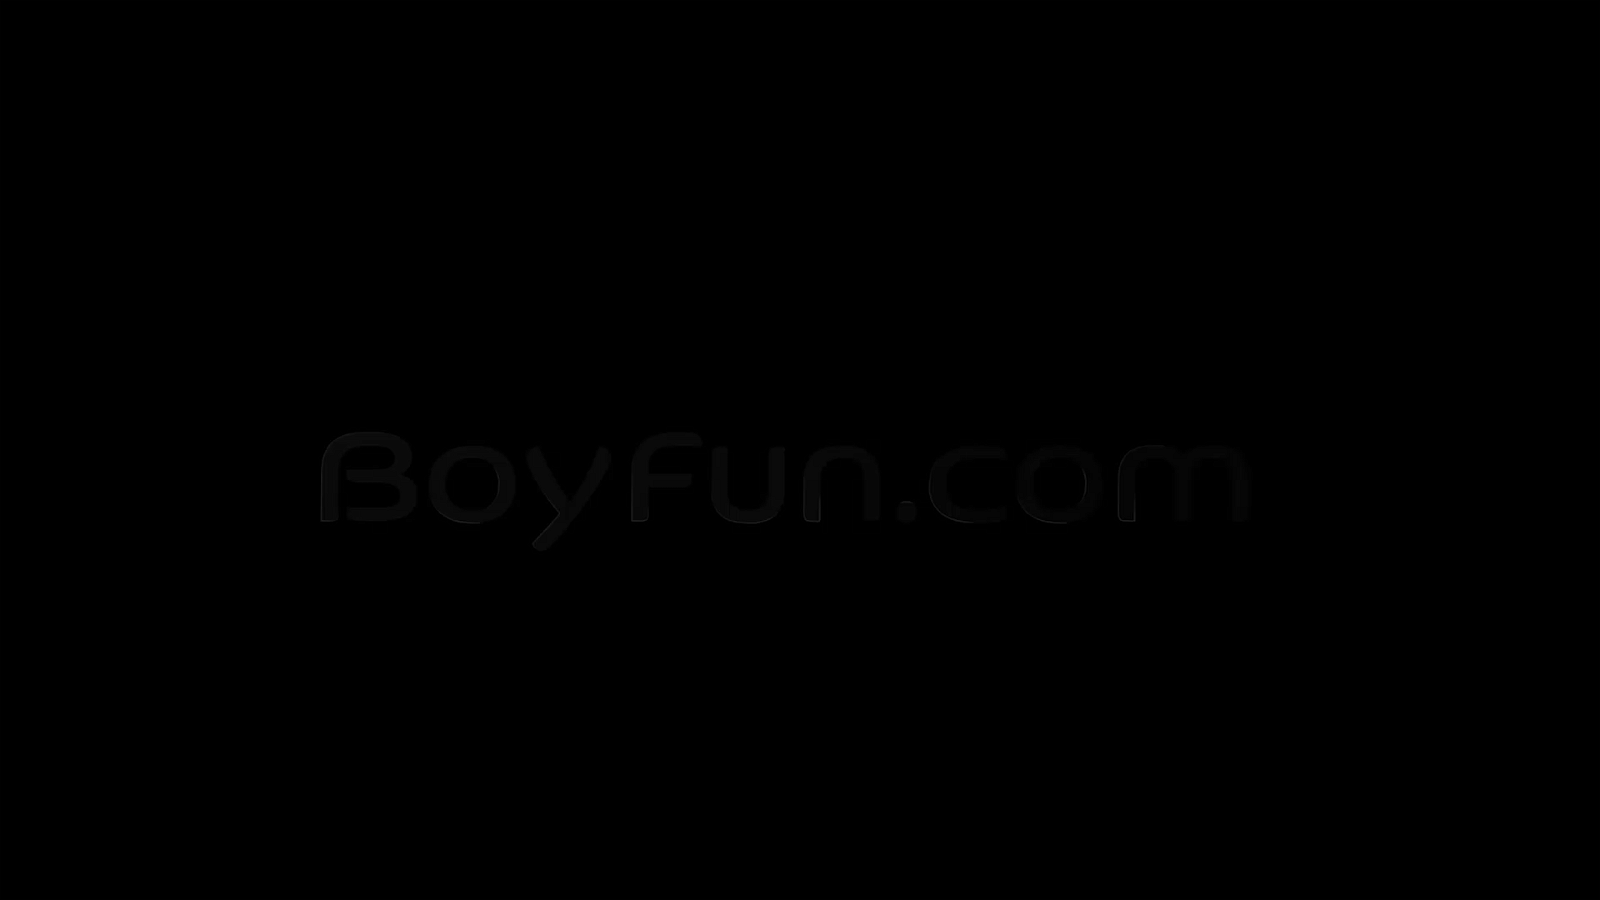 Video post by GayPorn